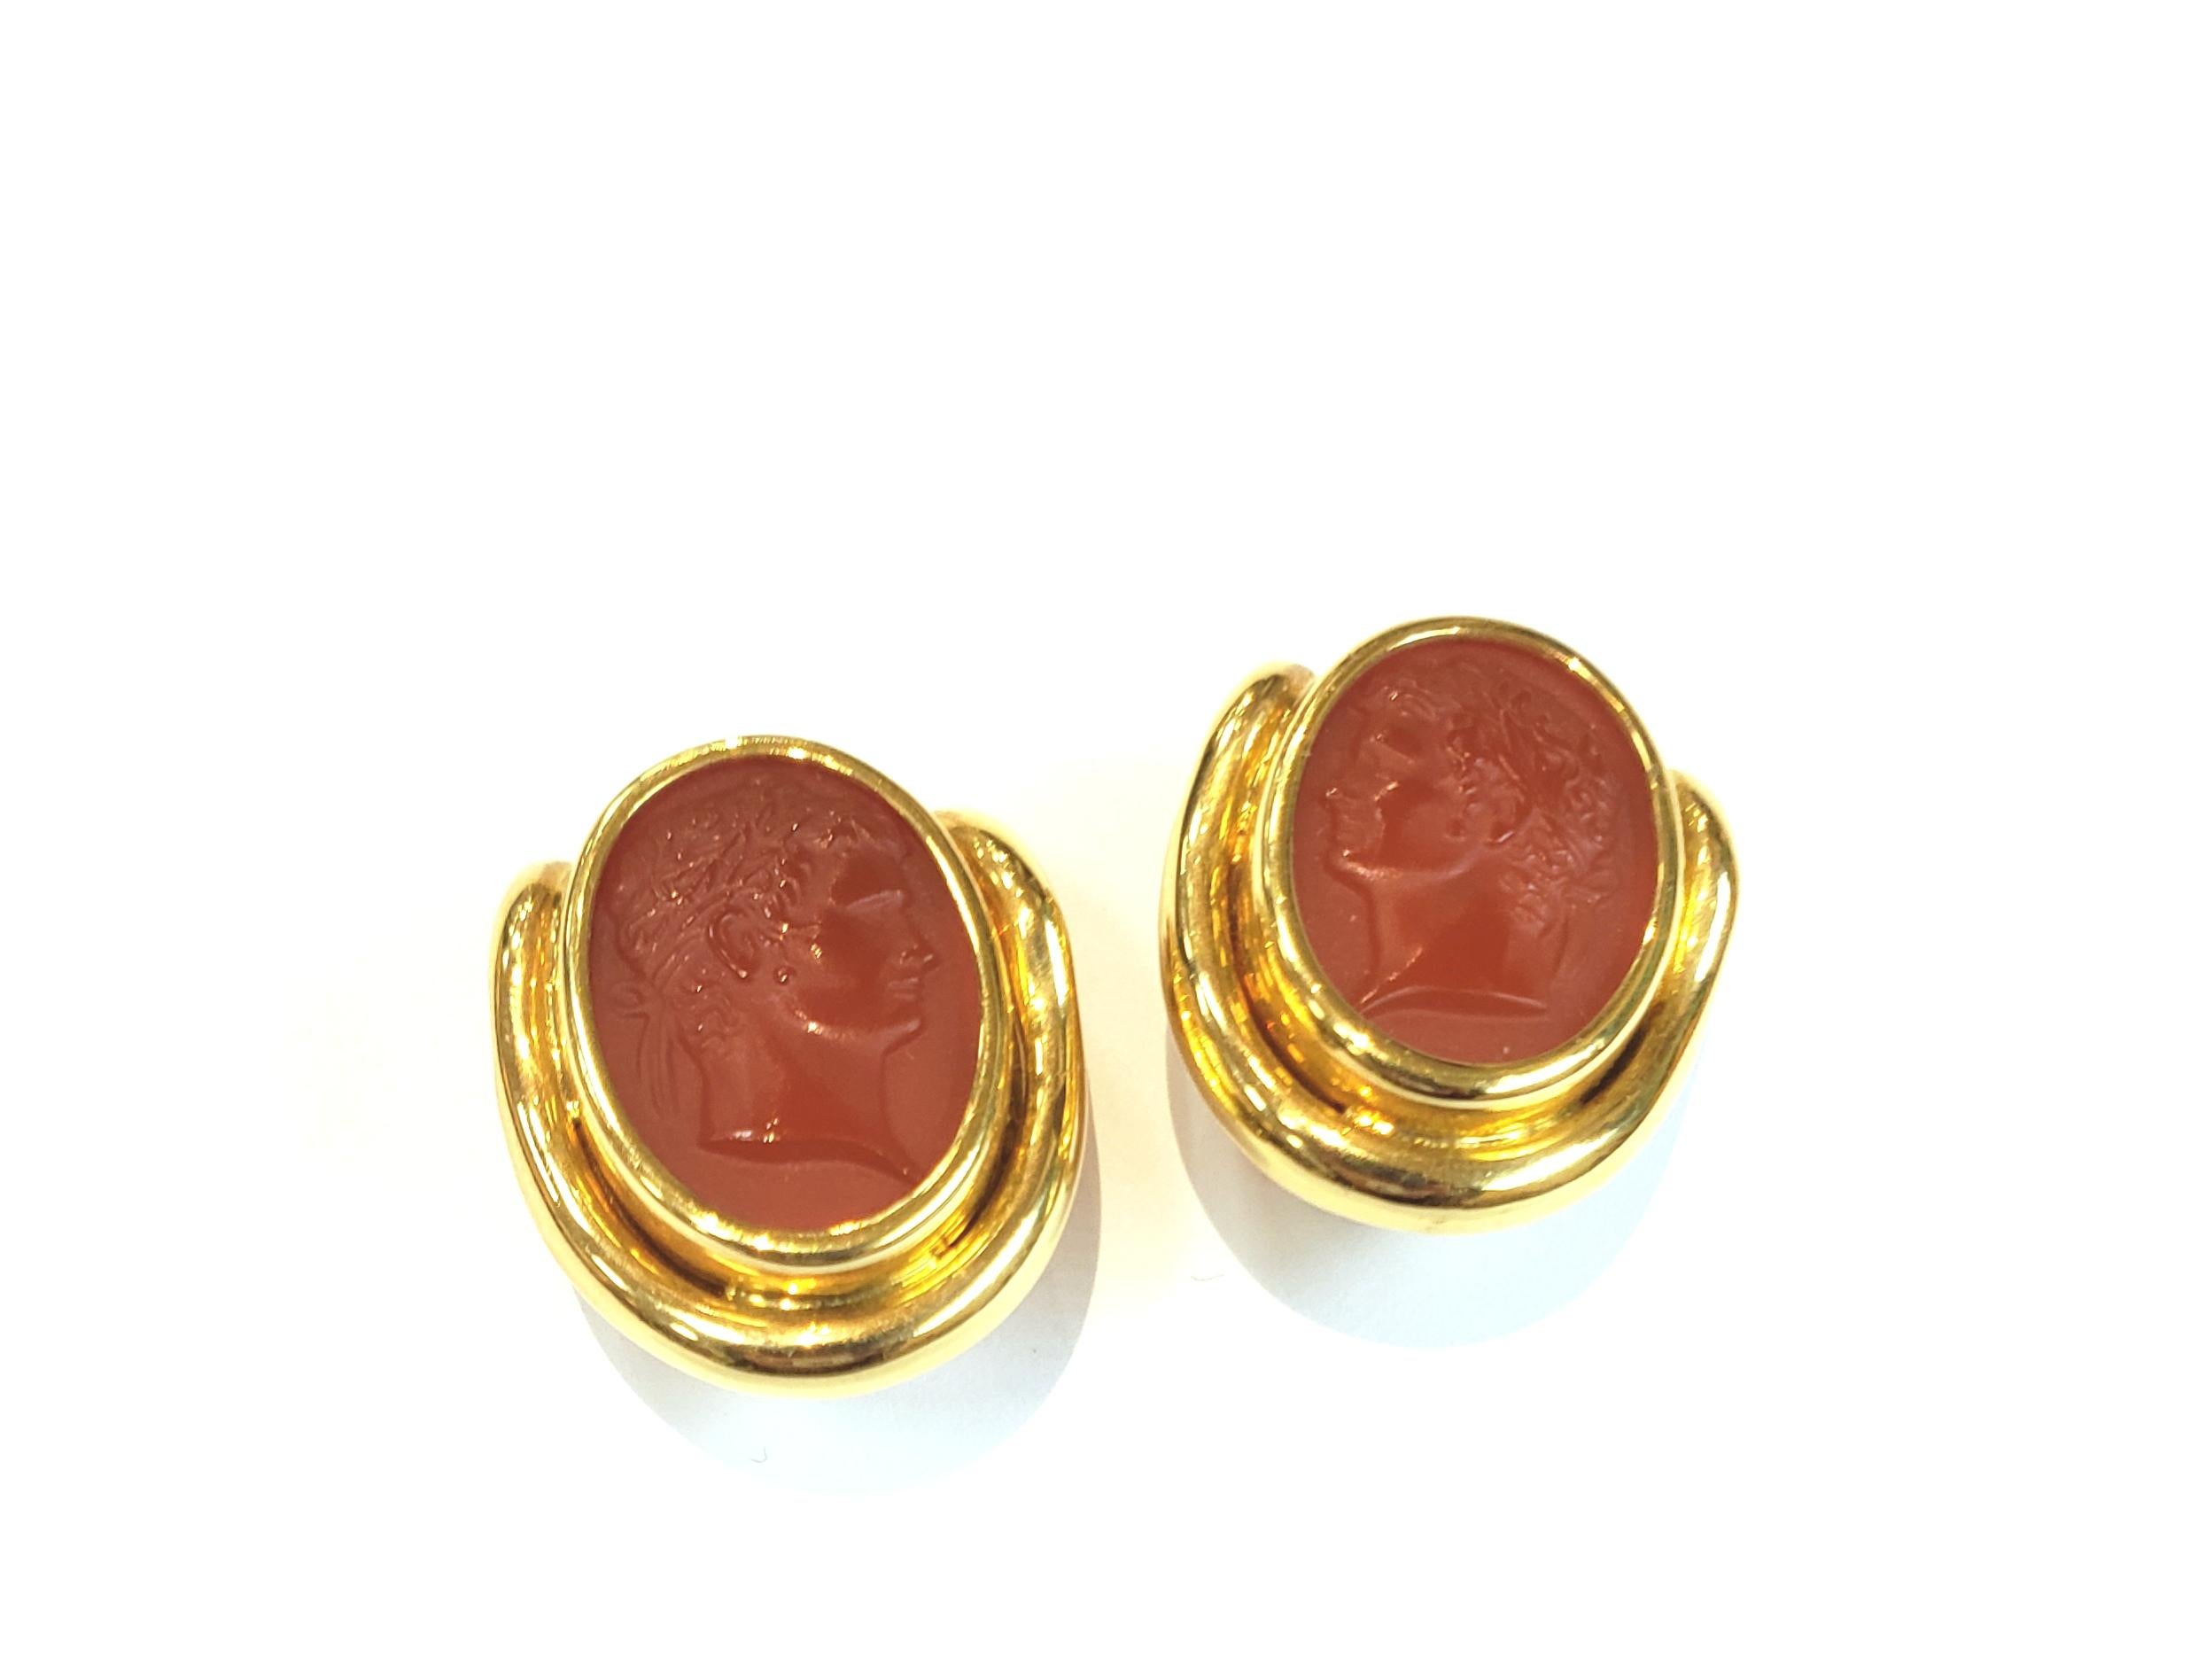 **LOWER PRICE** Italian made 18 karat yellow gold and carnelian intaglio earrings. Earrings have a wide full bezel with a partial second 